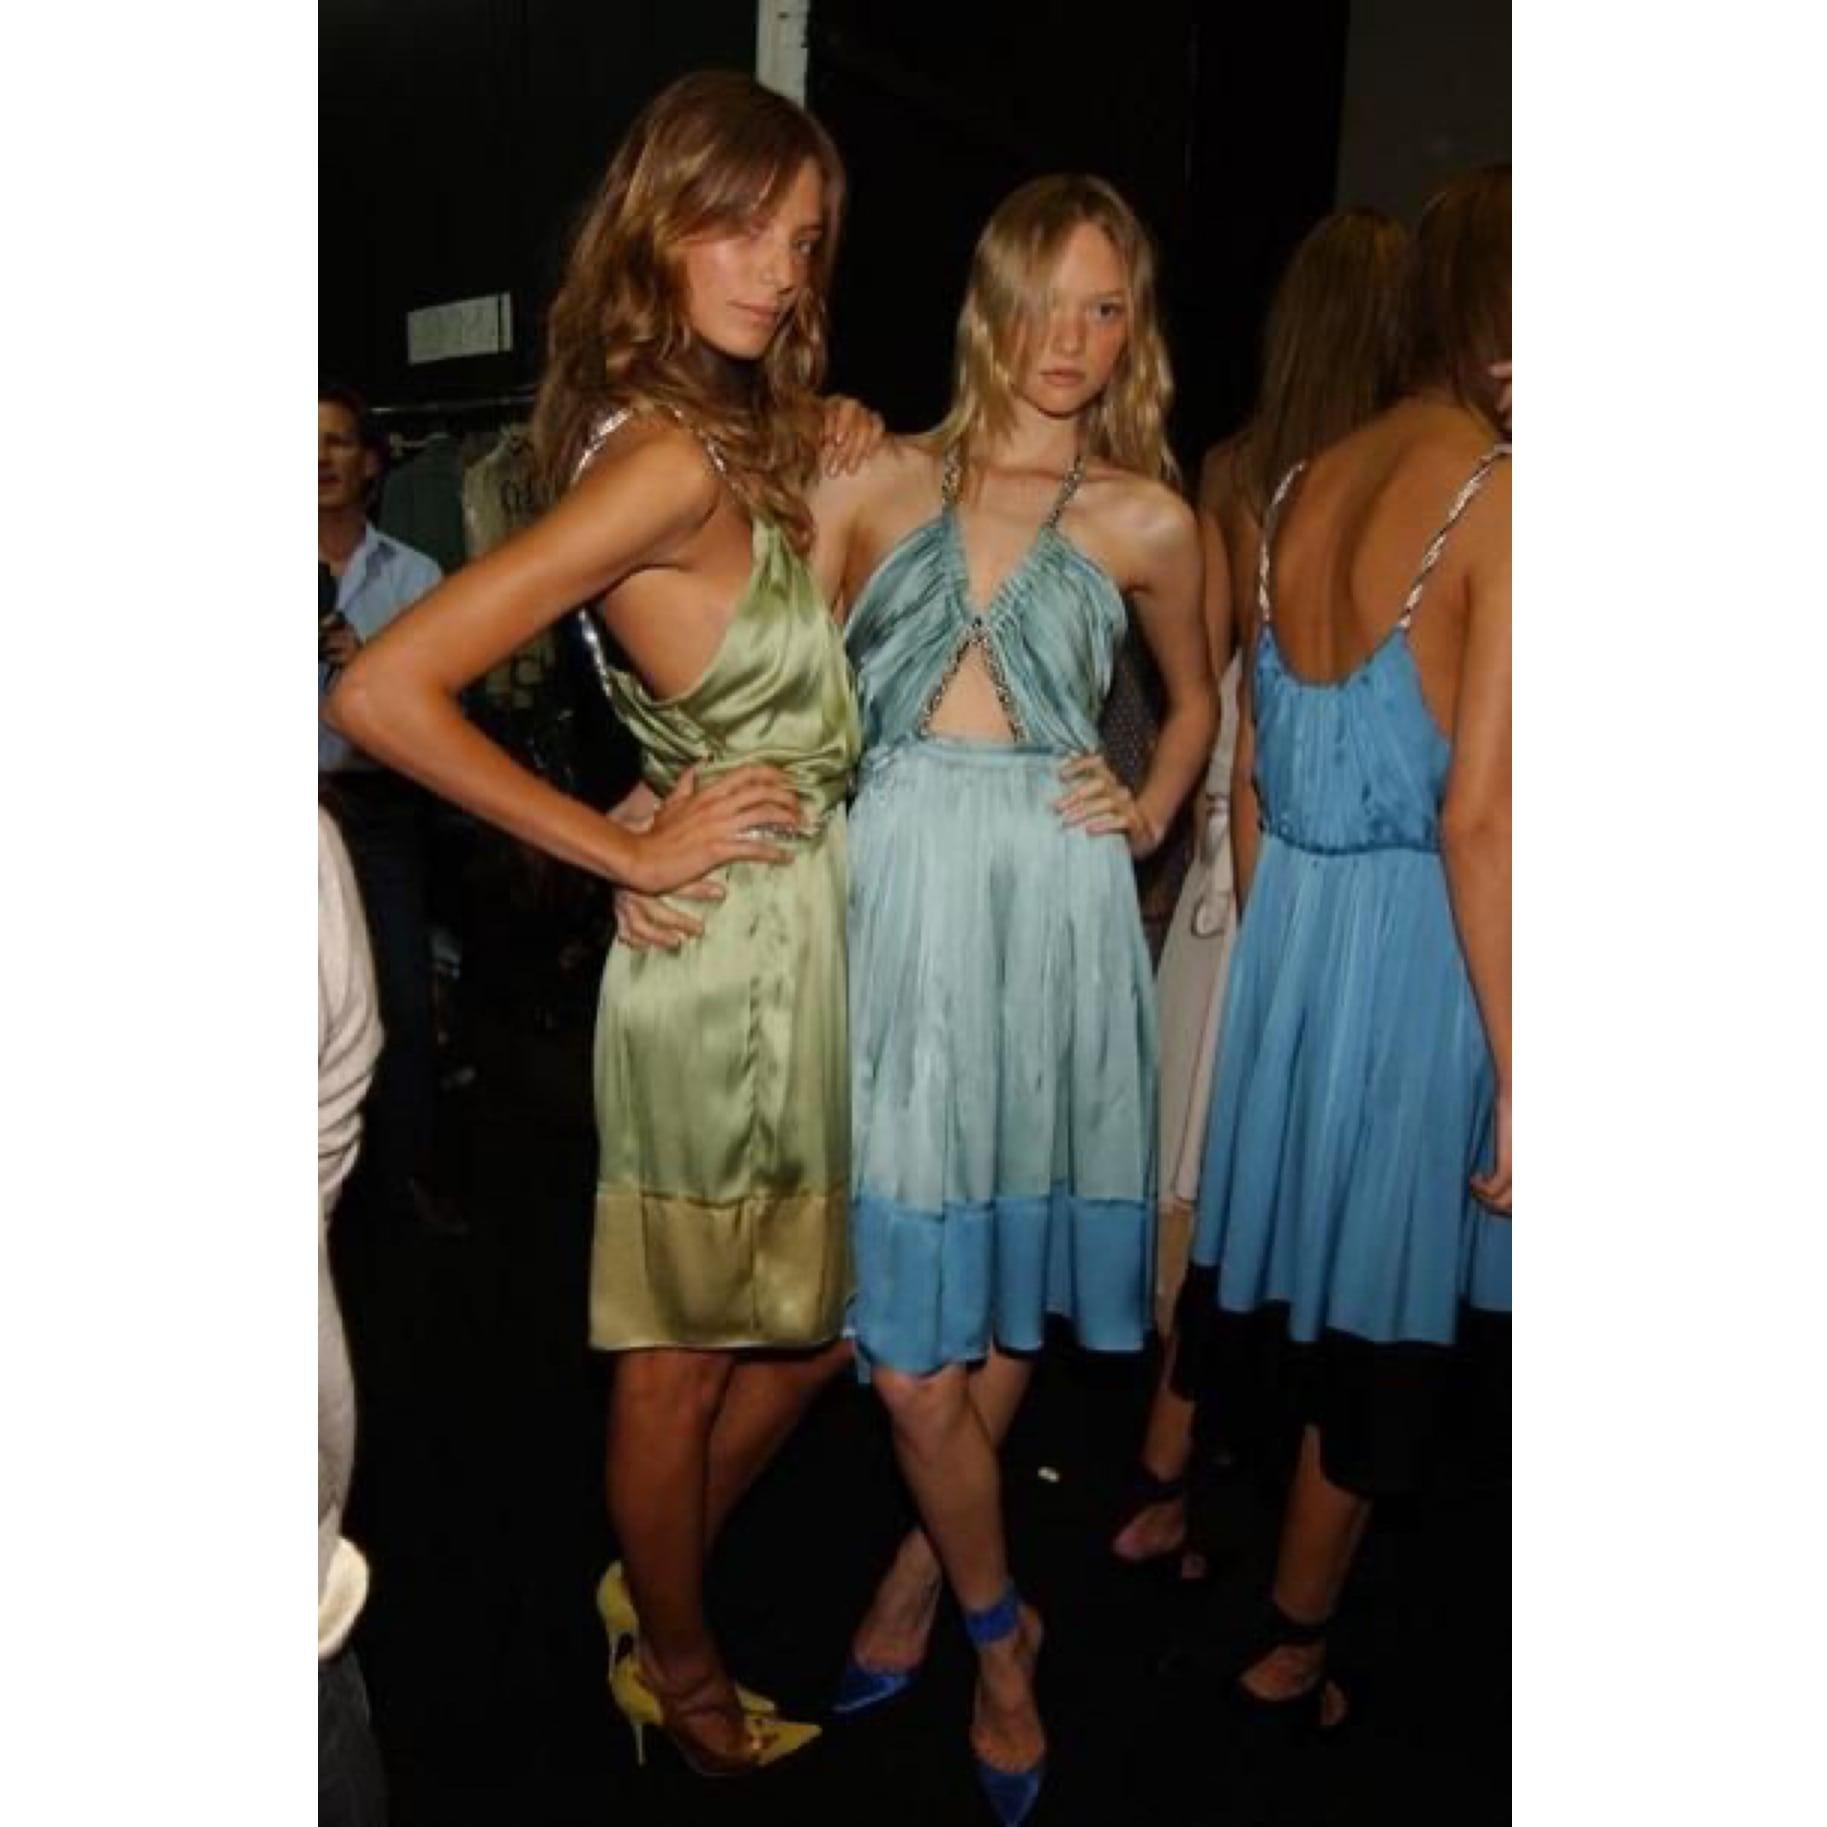 For the 2005 Chloé Spring collection, creative director Phoebe Philo designed a breezy yet beautiful array of silk skirts and dresses alongside Victorian military jackets, ruffled shirts, and tux pants.  As Sarah Mower wrote for Vogue, “Her unerring